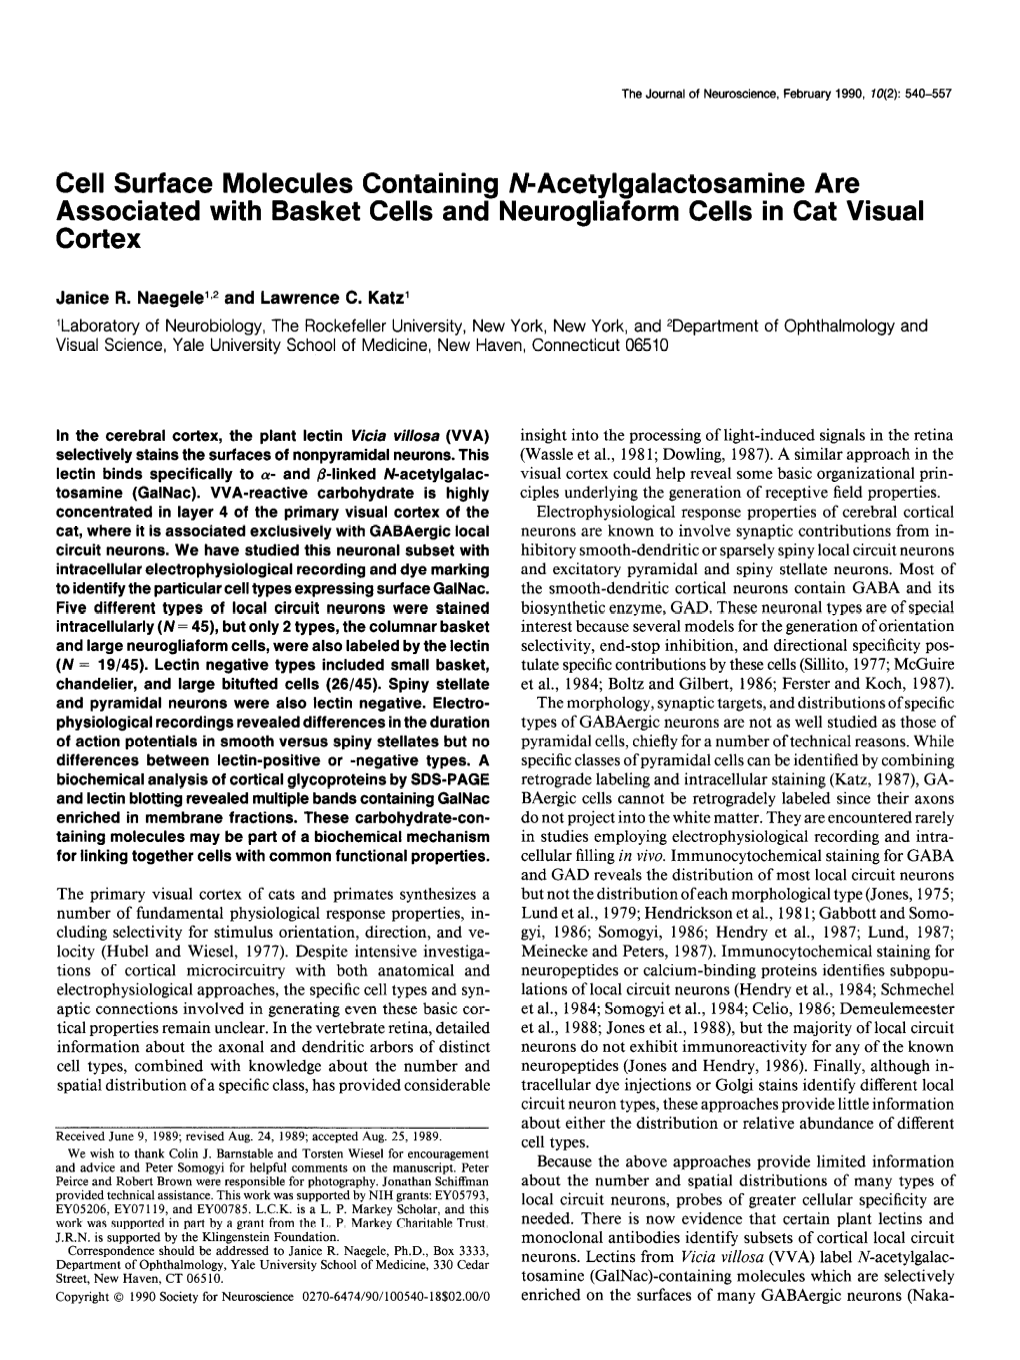 Cell Surface Molecules Containing IV-Acetylgalactosamine Are Associated with Basket Cells and Neurogliaform Cells in Cat Visual Cortex